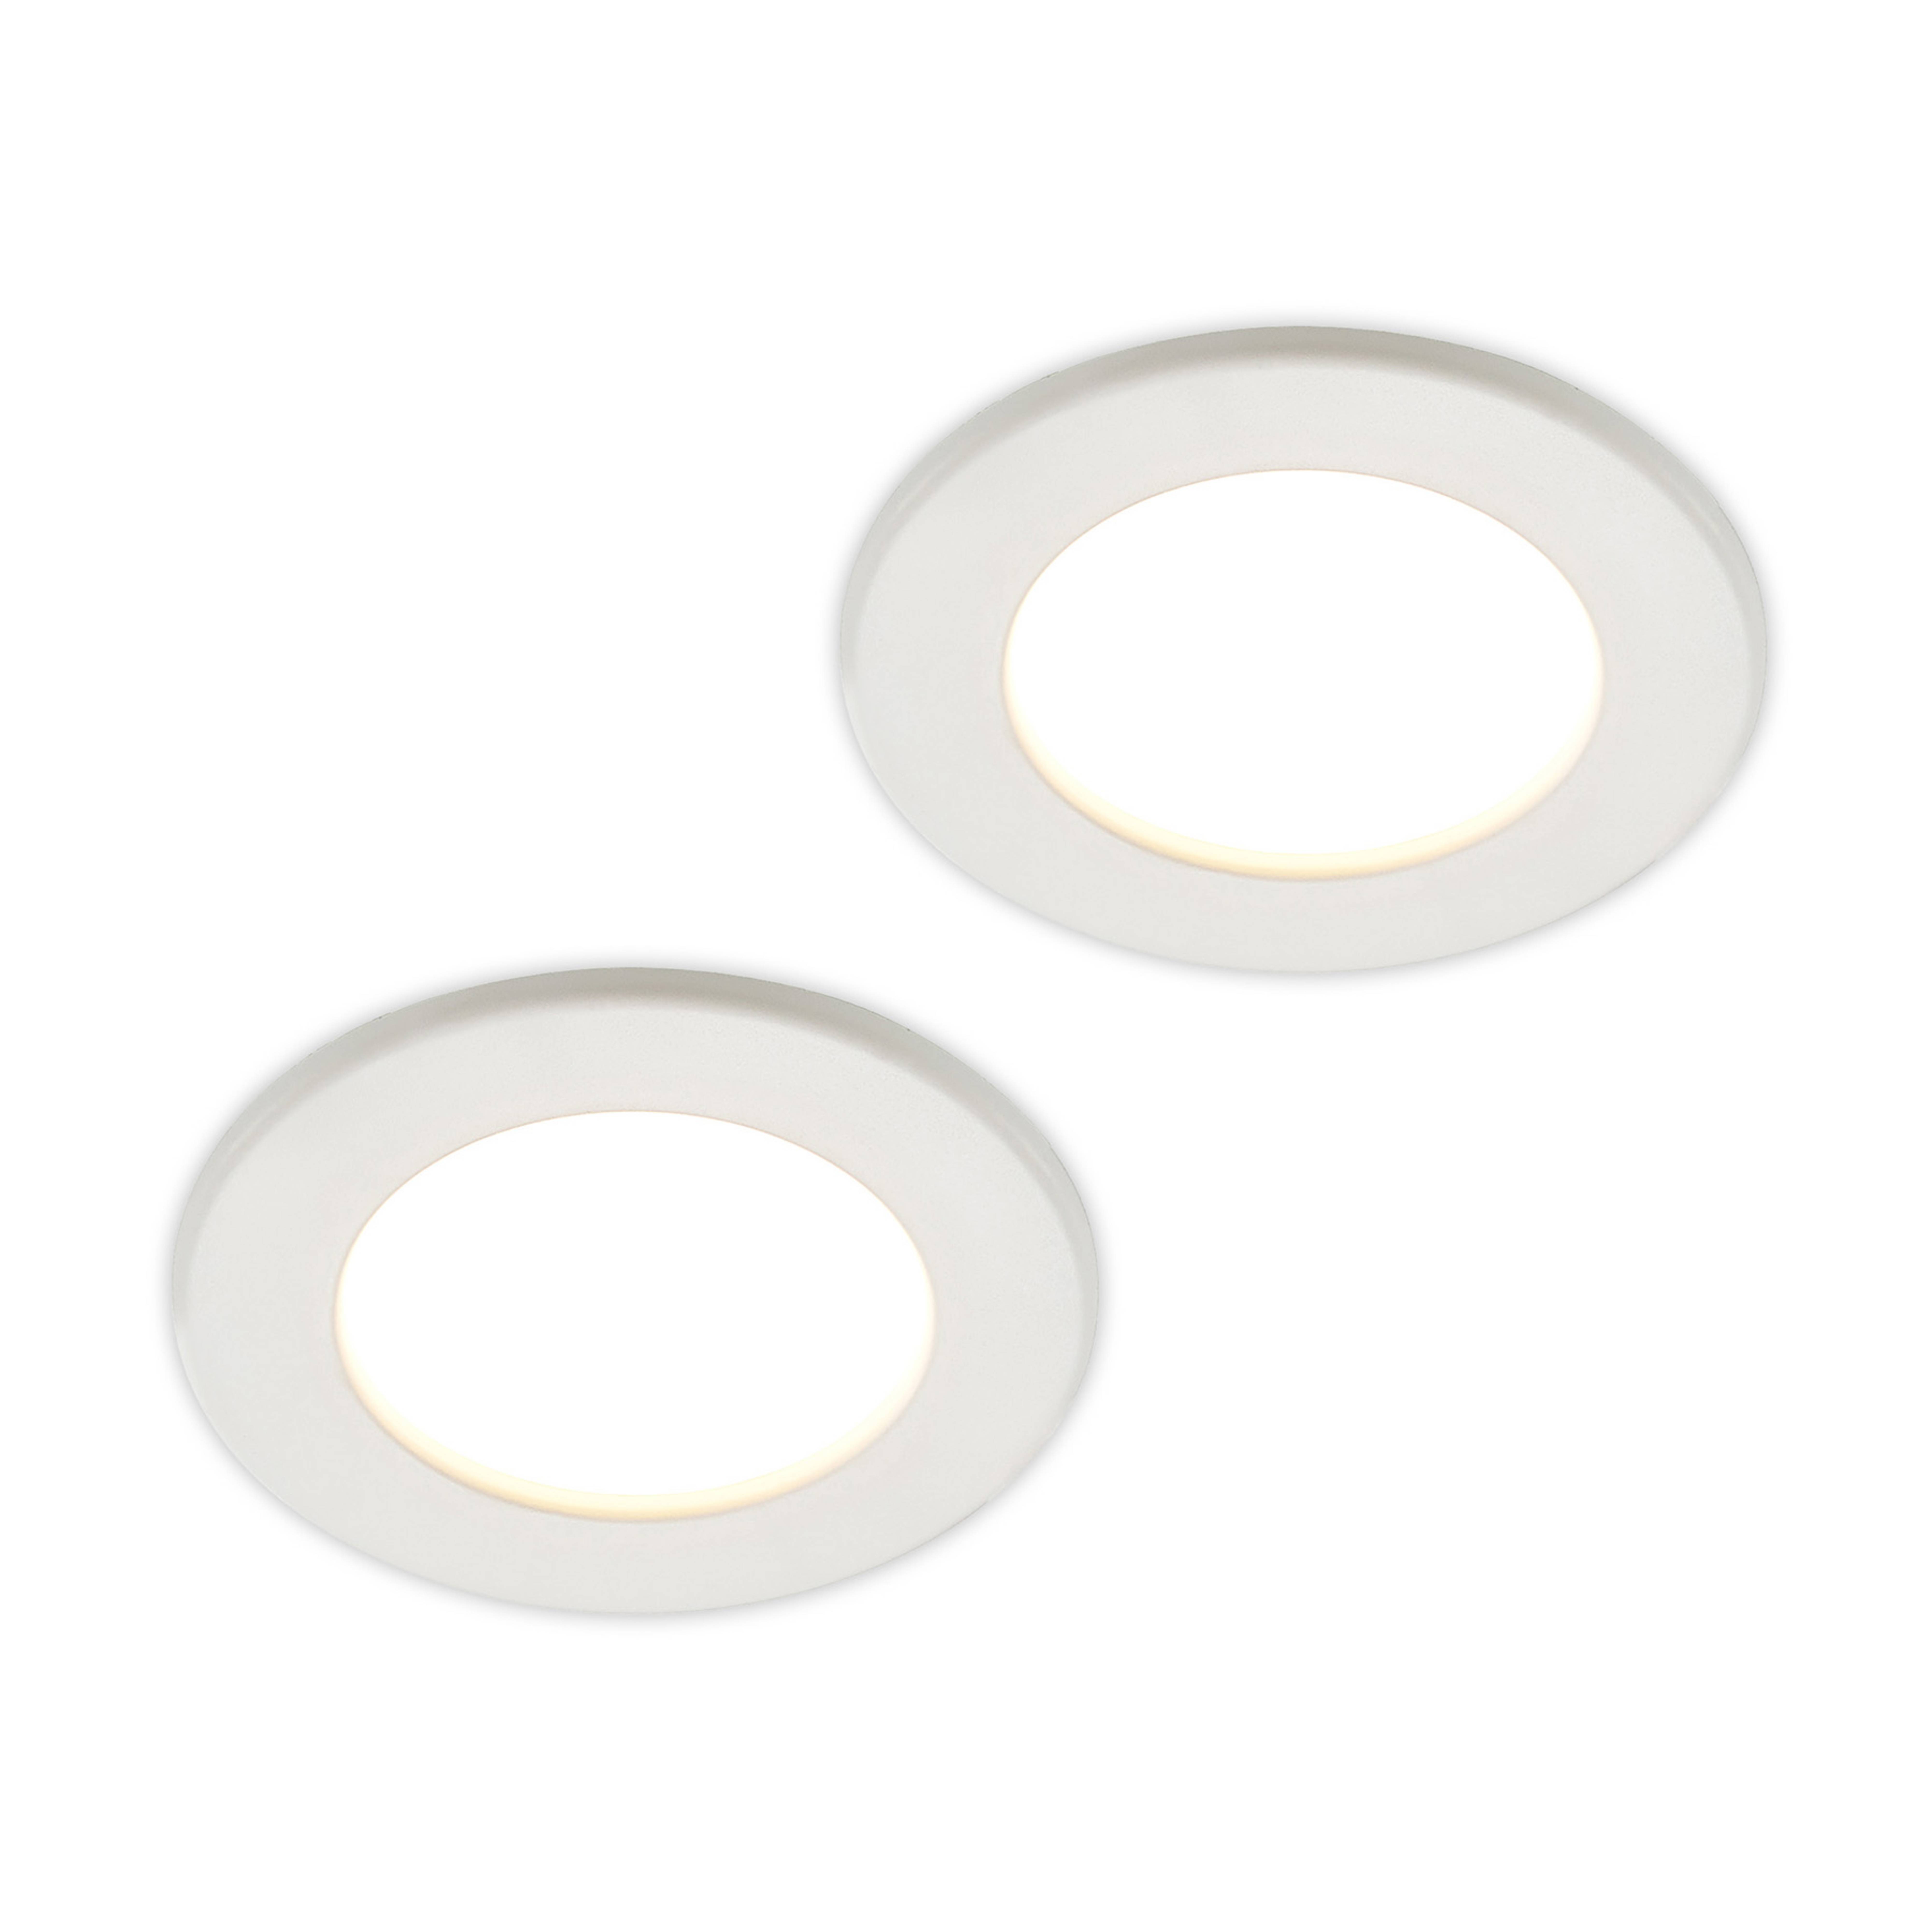 Prios LED recessed light Cadance, white, 11.5cm, 2pcs, dimmable